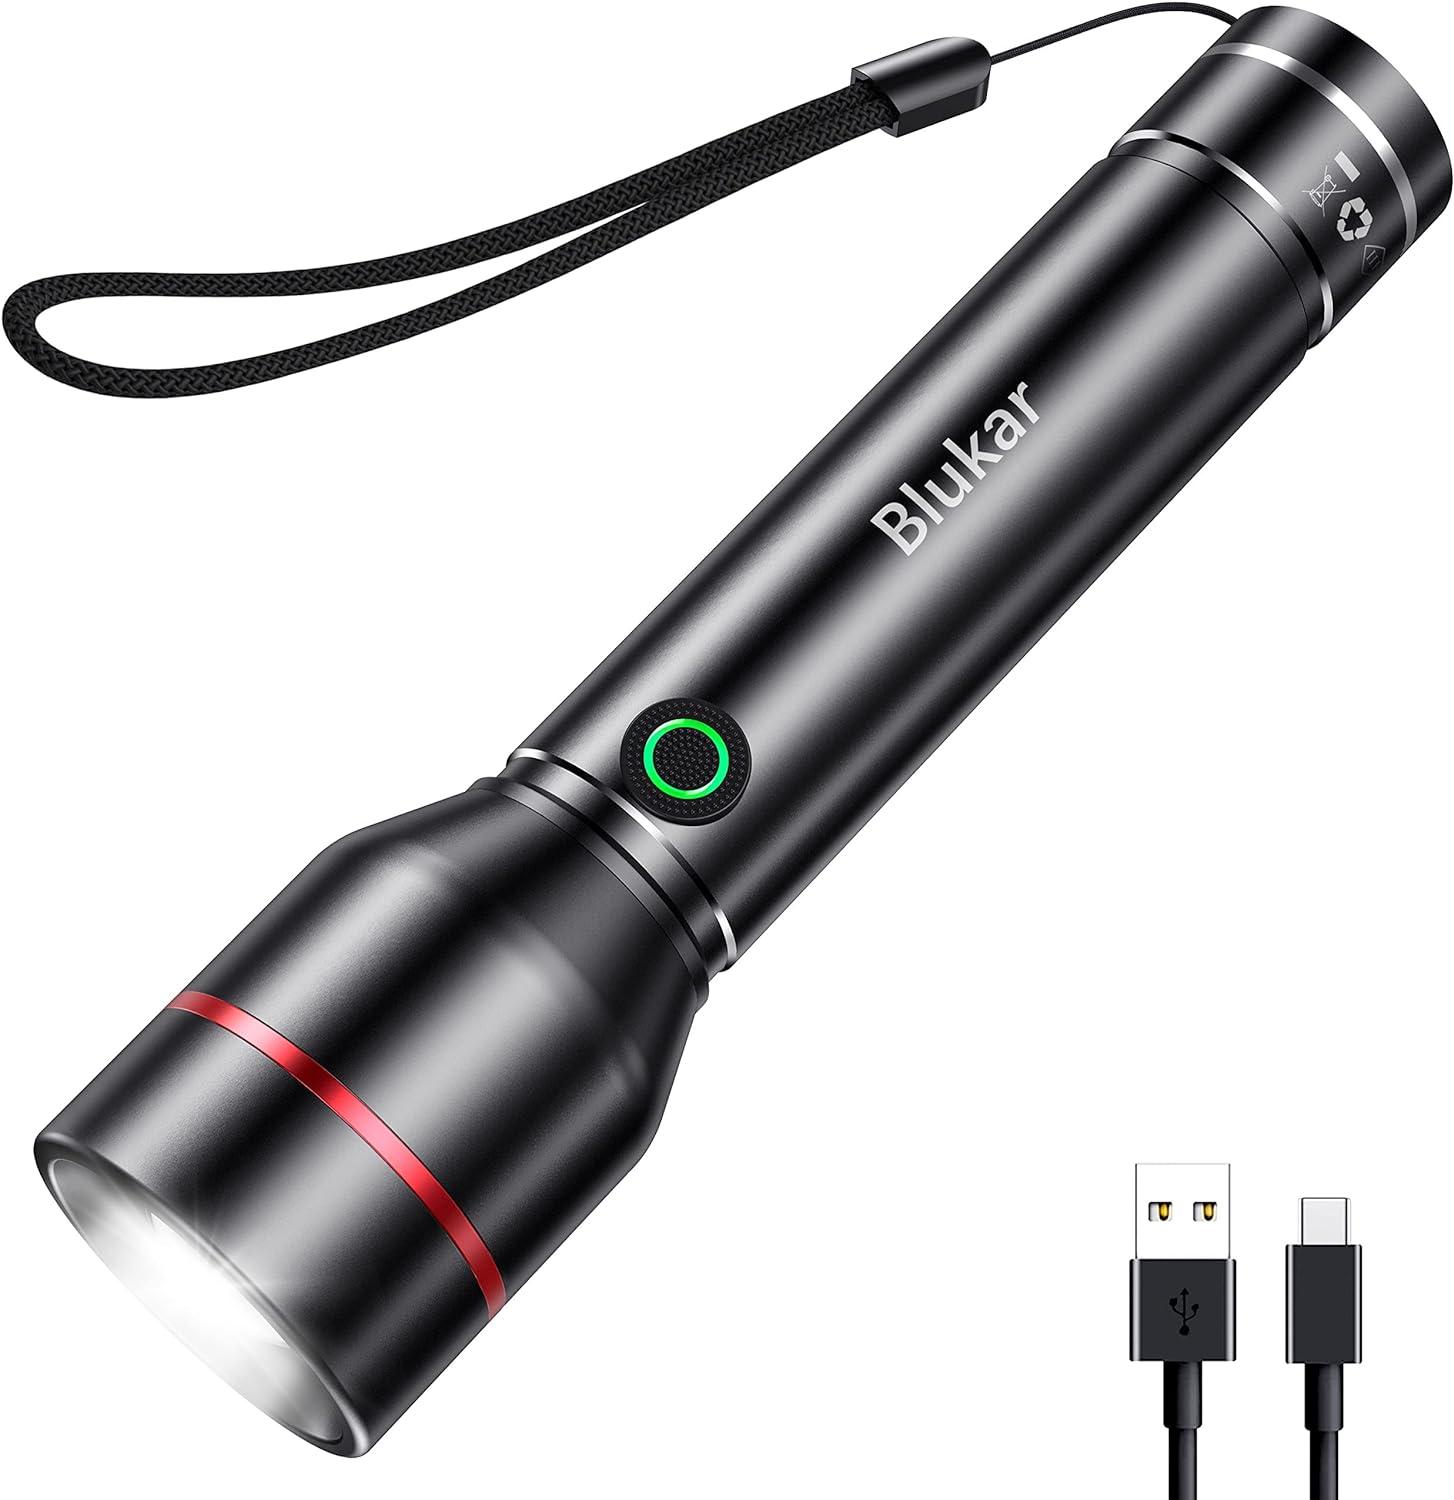 Blukar LED Mini Torch Rechargeable Waterproof, Super Bright Adjustable Focus Flashlight with 5 Lighting Modes